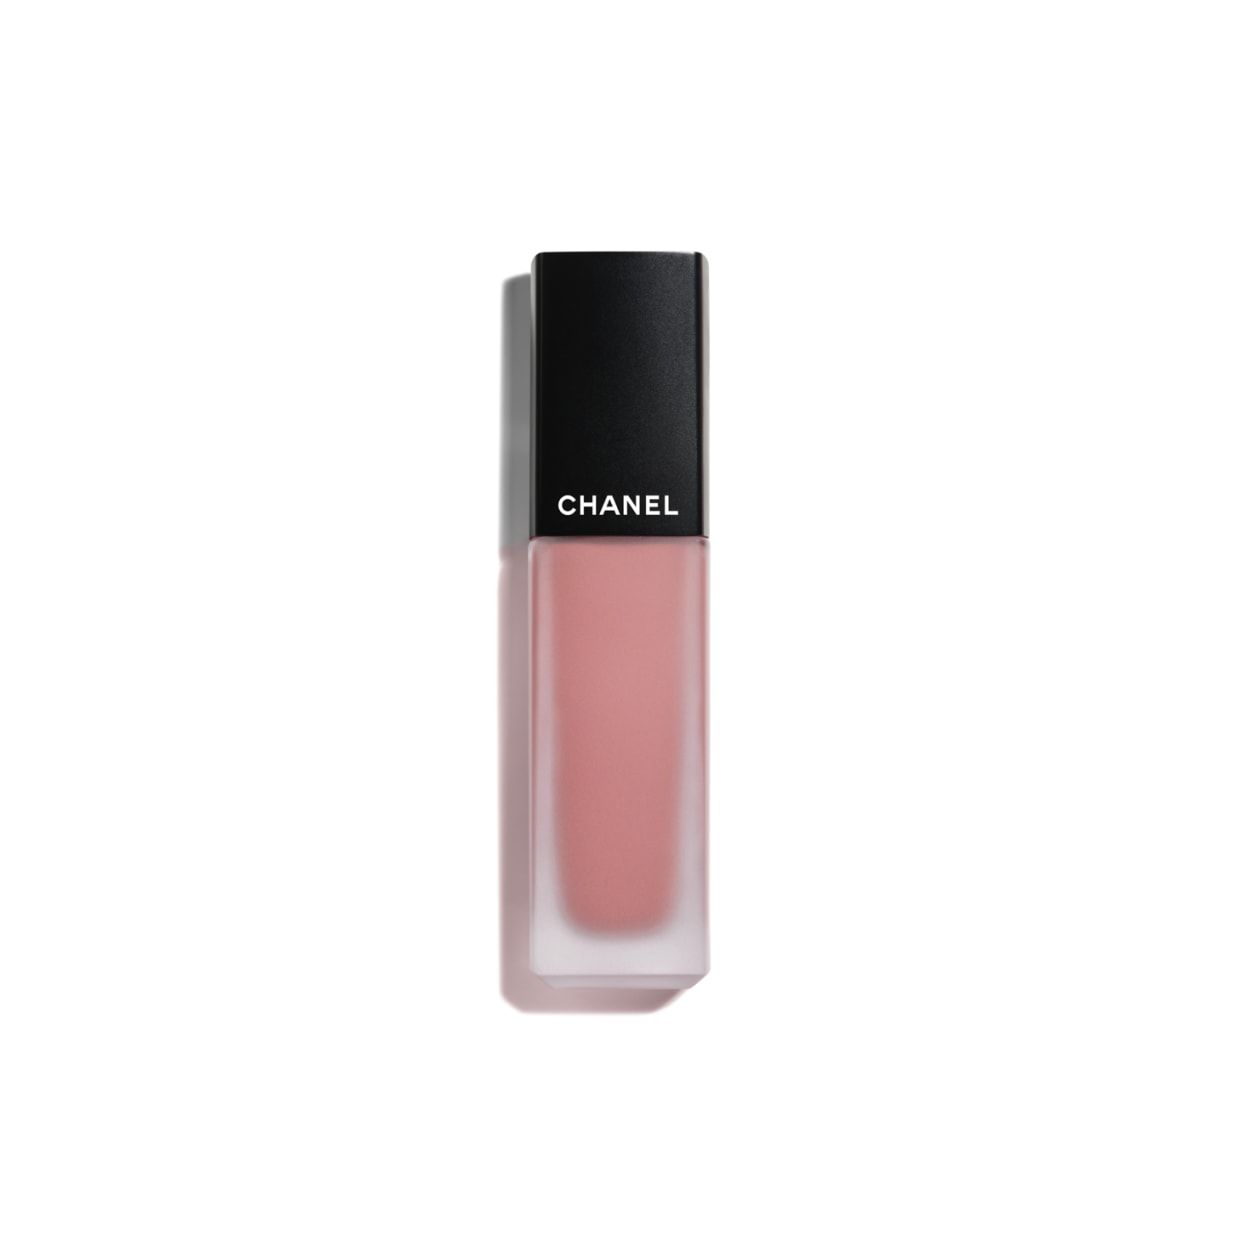 ROUGE ALLURE INK FUSION | Chanel, Inc. (US)